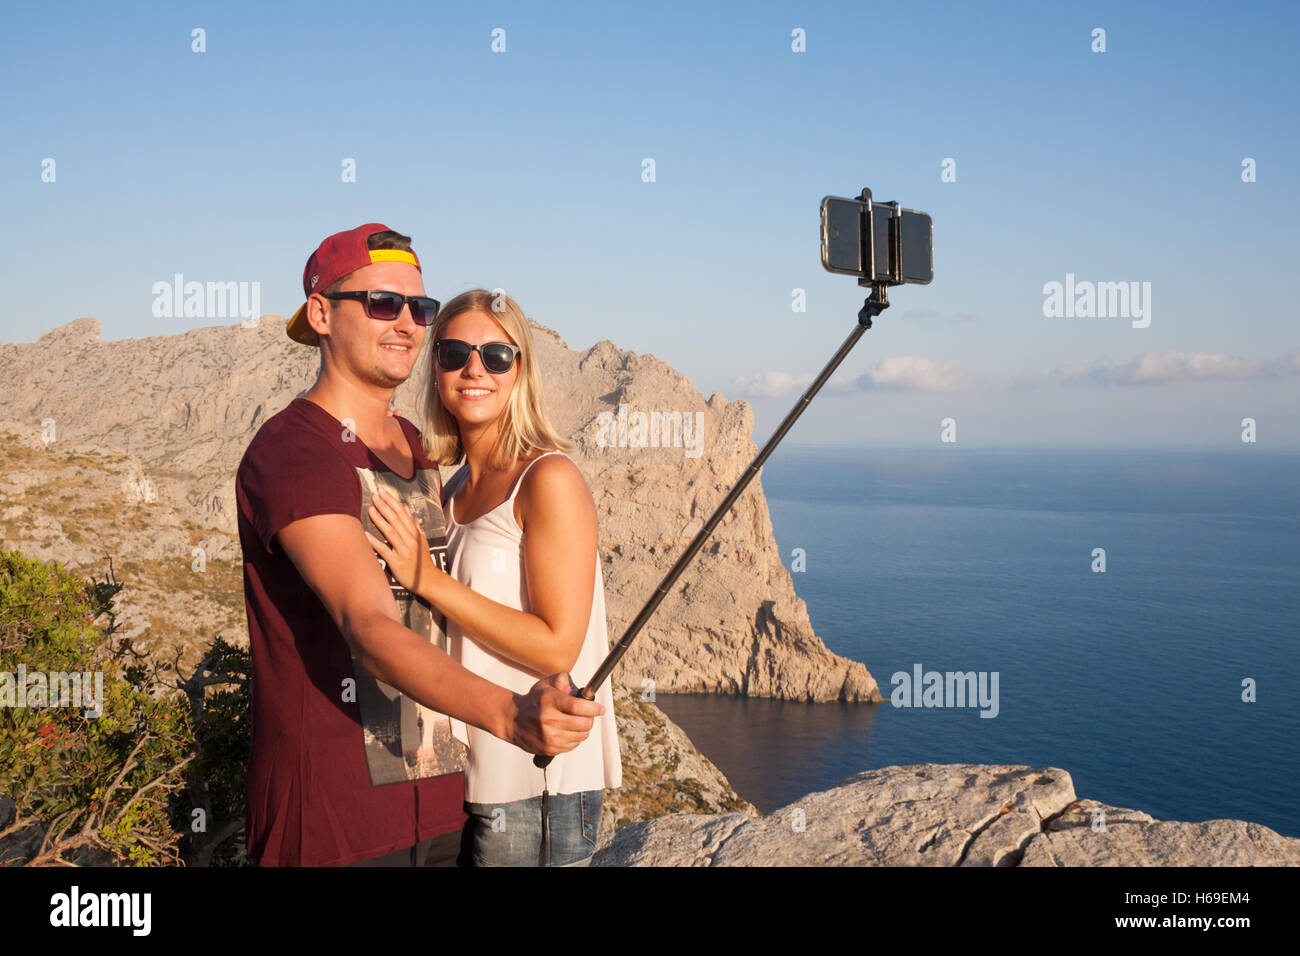 One male and a female using a selfie stick and mobile phone to photograph themselves at Formentor, Mallorca, Summer 2016. Blue sky and sea behind them. Stock Photo